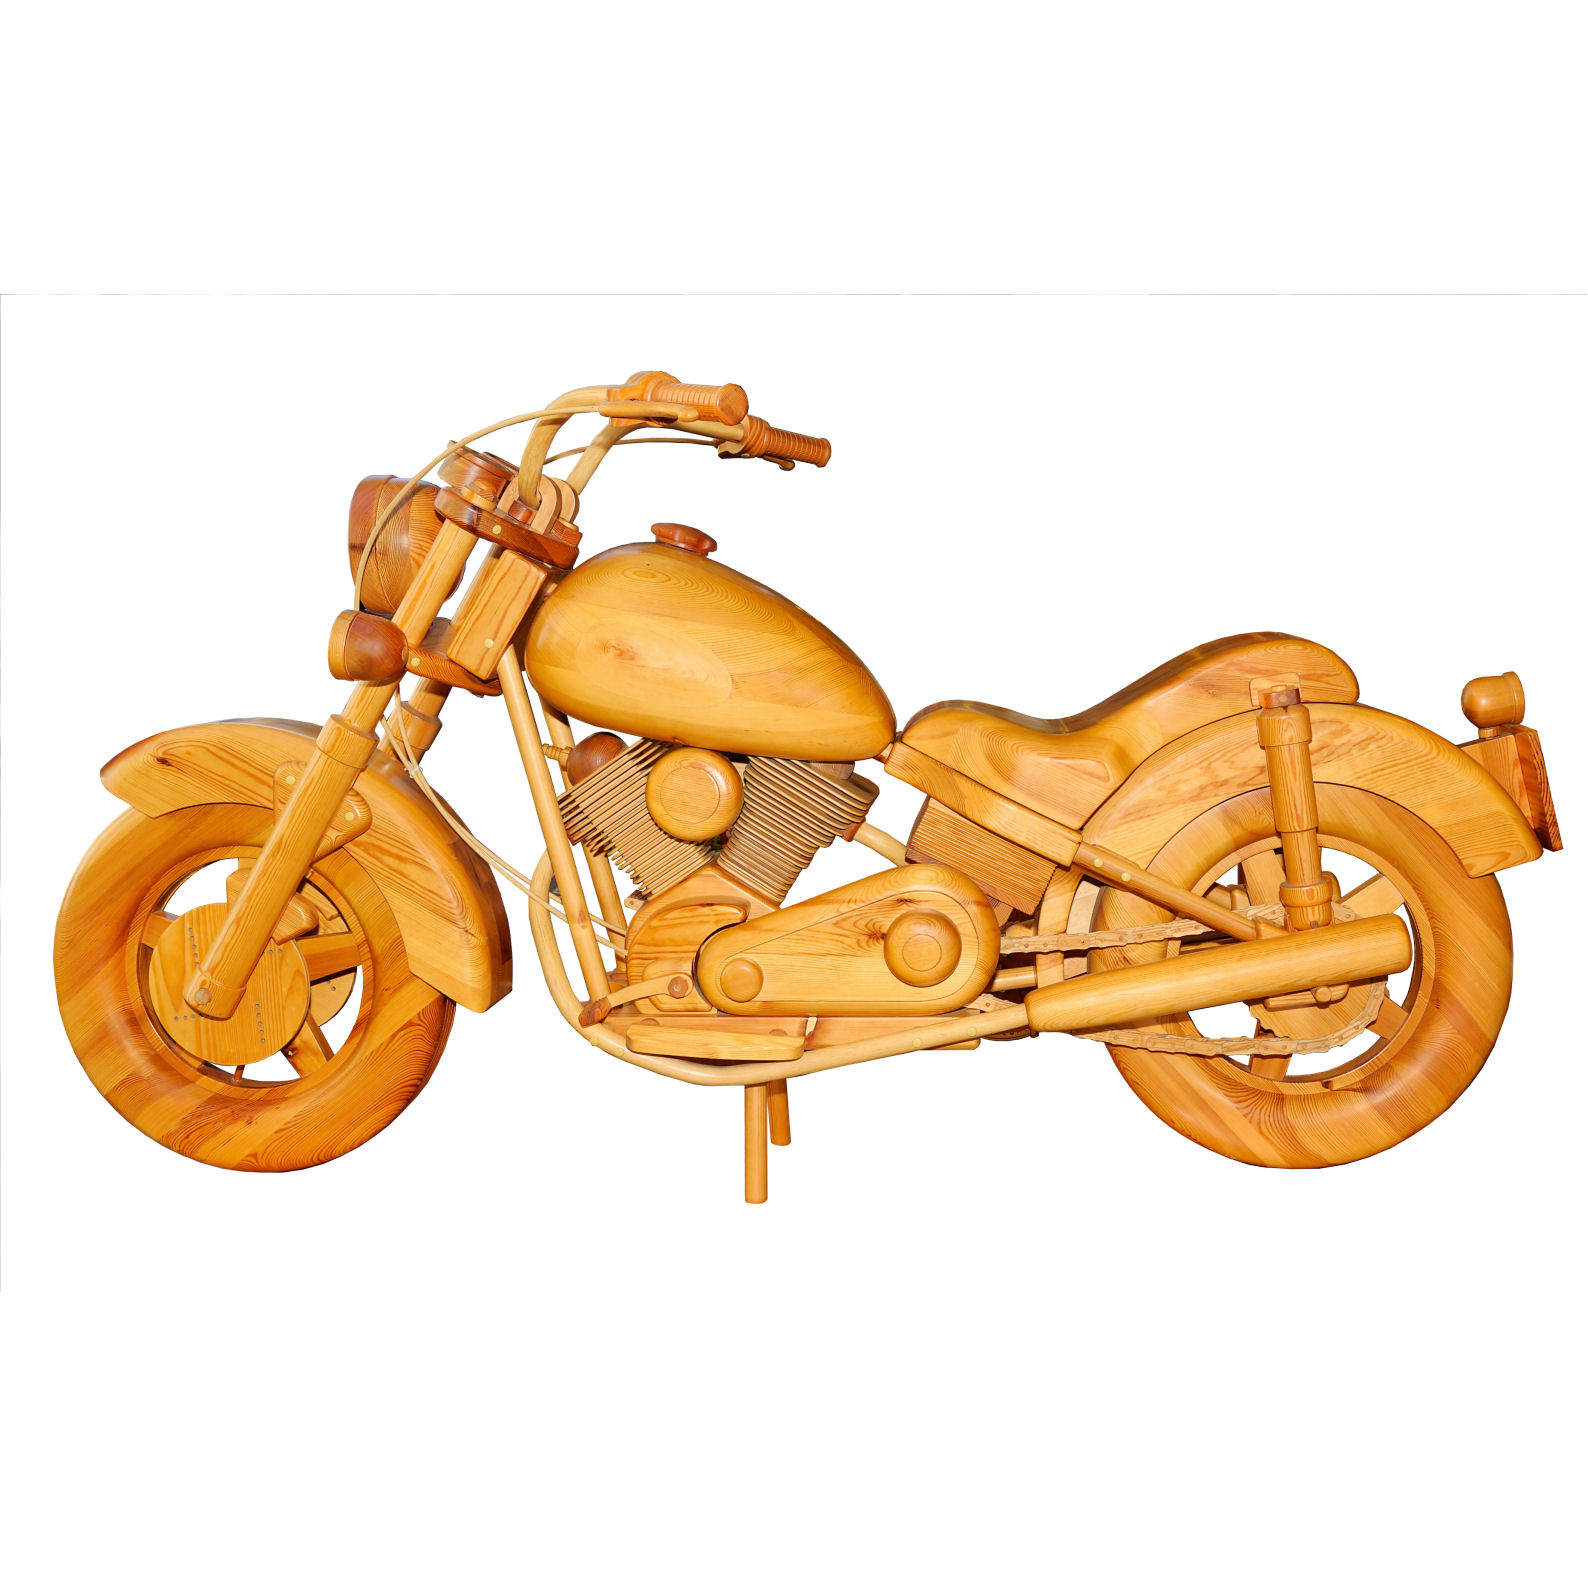 wooden motorcycles Hand Carved sculpture crafted from teak wood